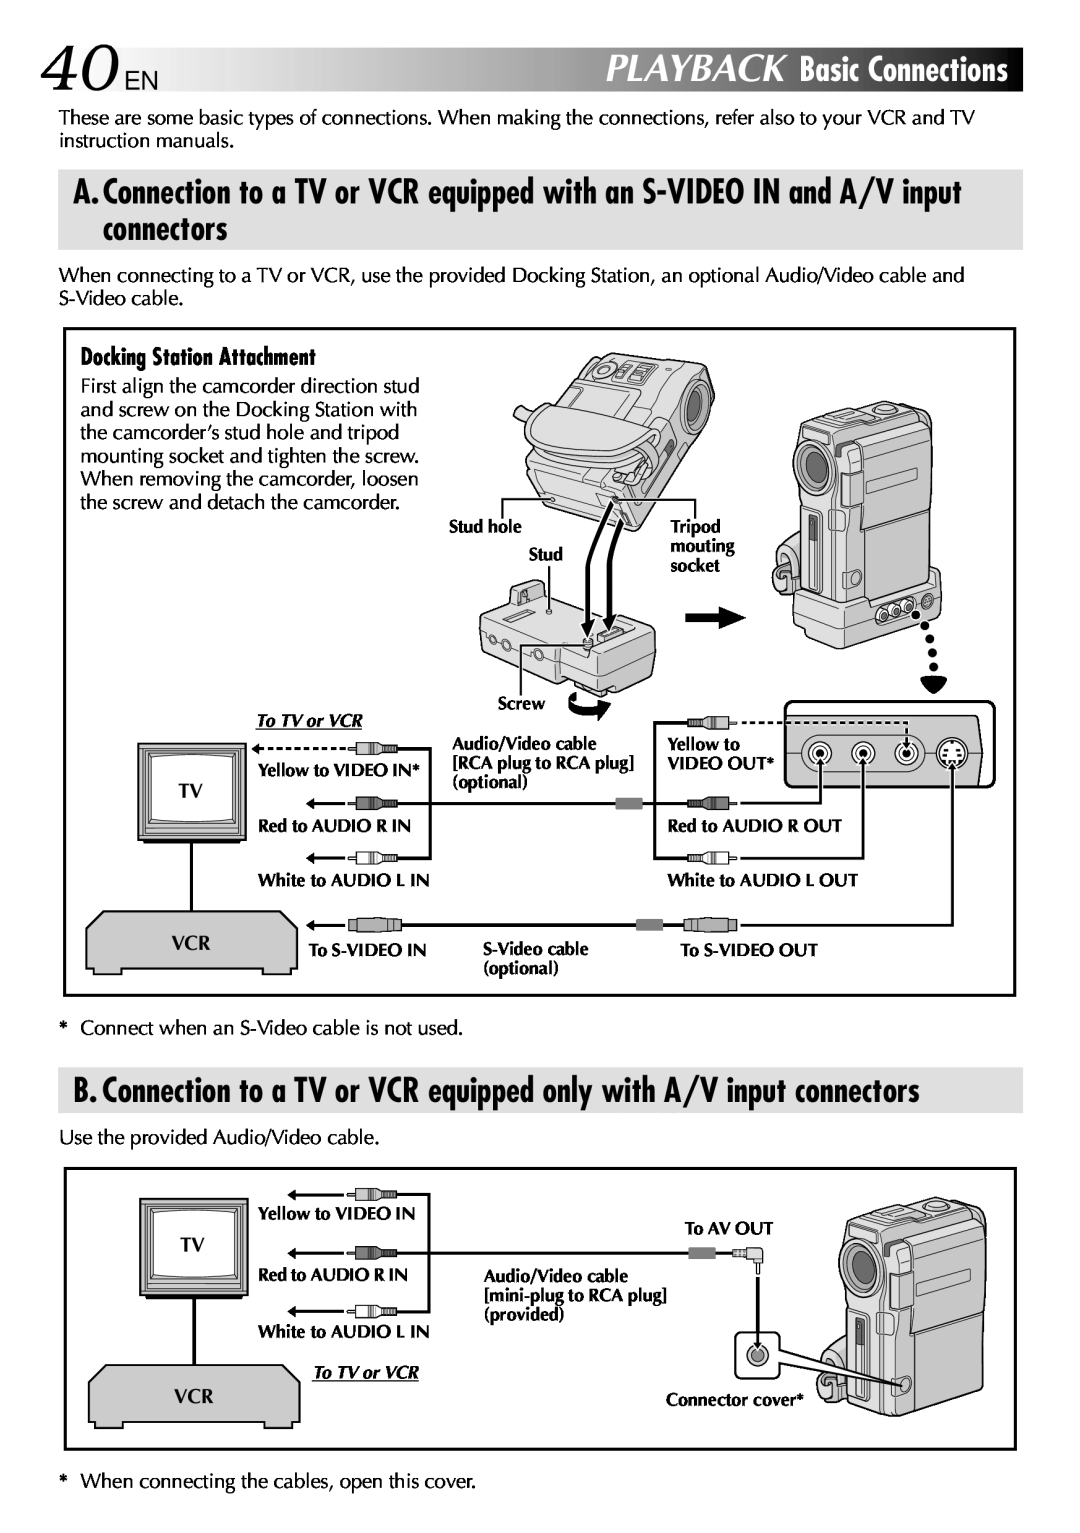 JVC GR-DVM80 40 EN, B. Connection to a TV or VCR equipped only with A/V input connectors, PLAYBACK Basic Connections 